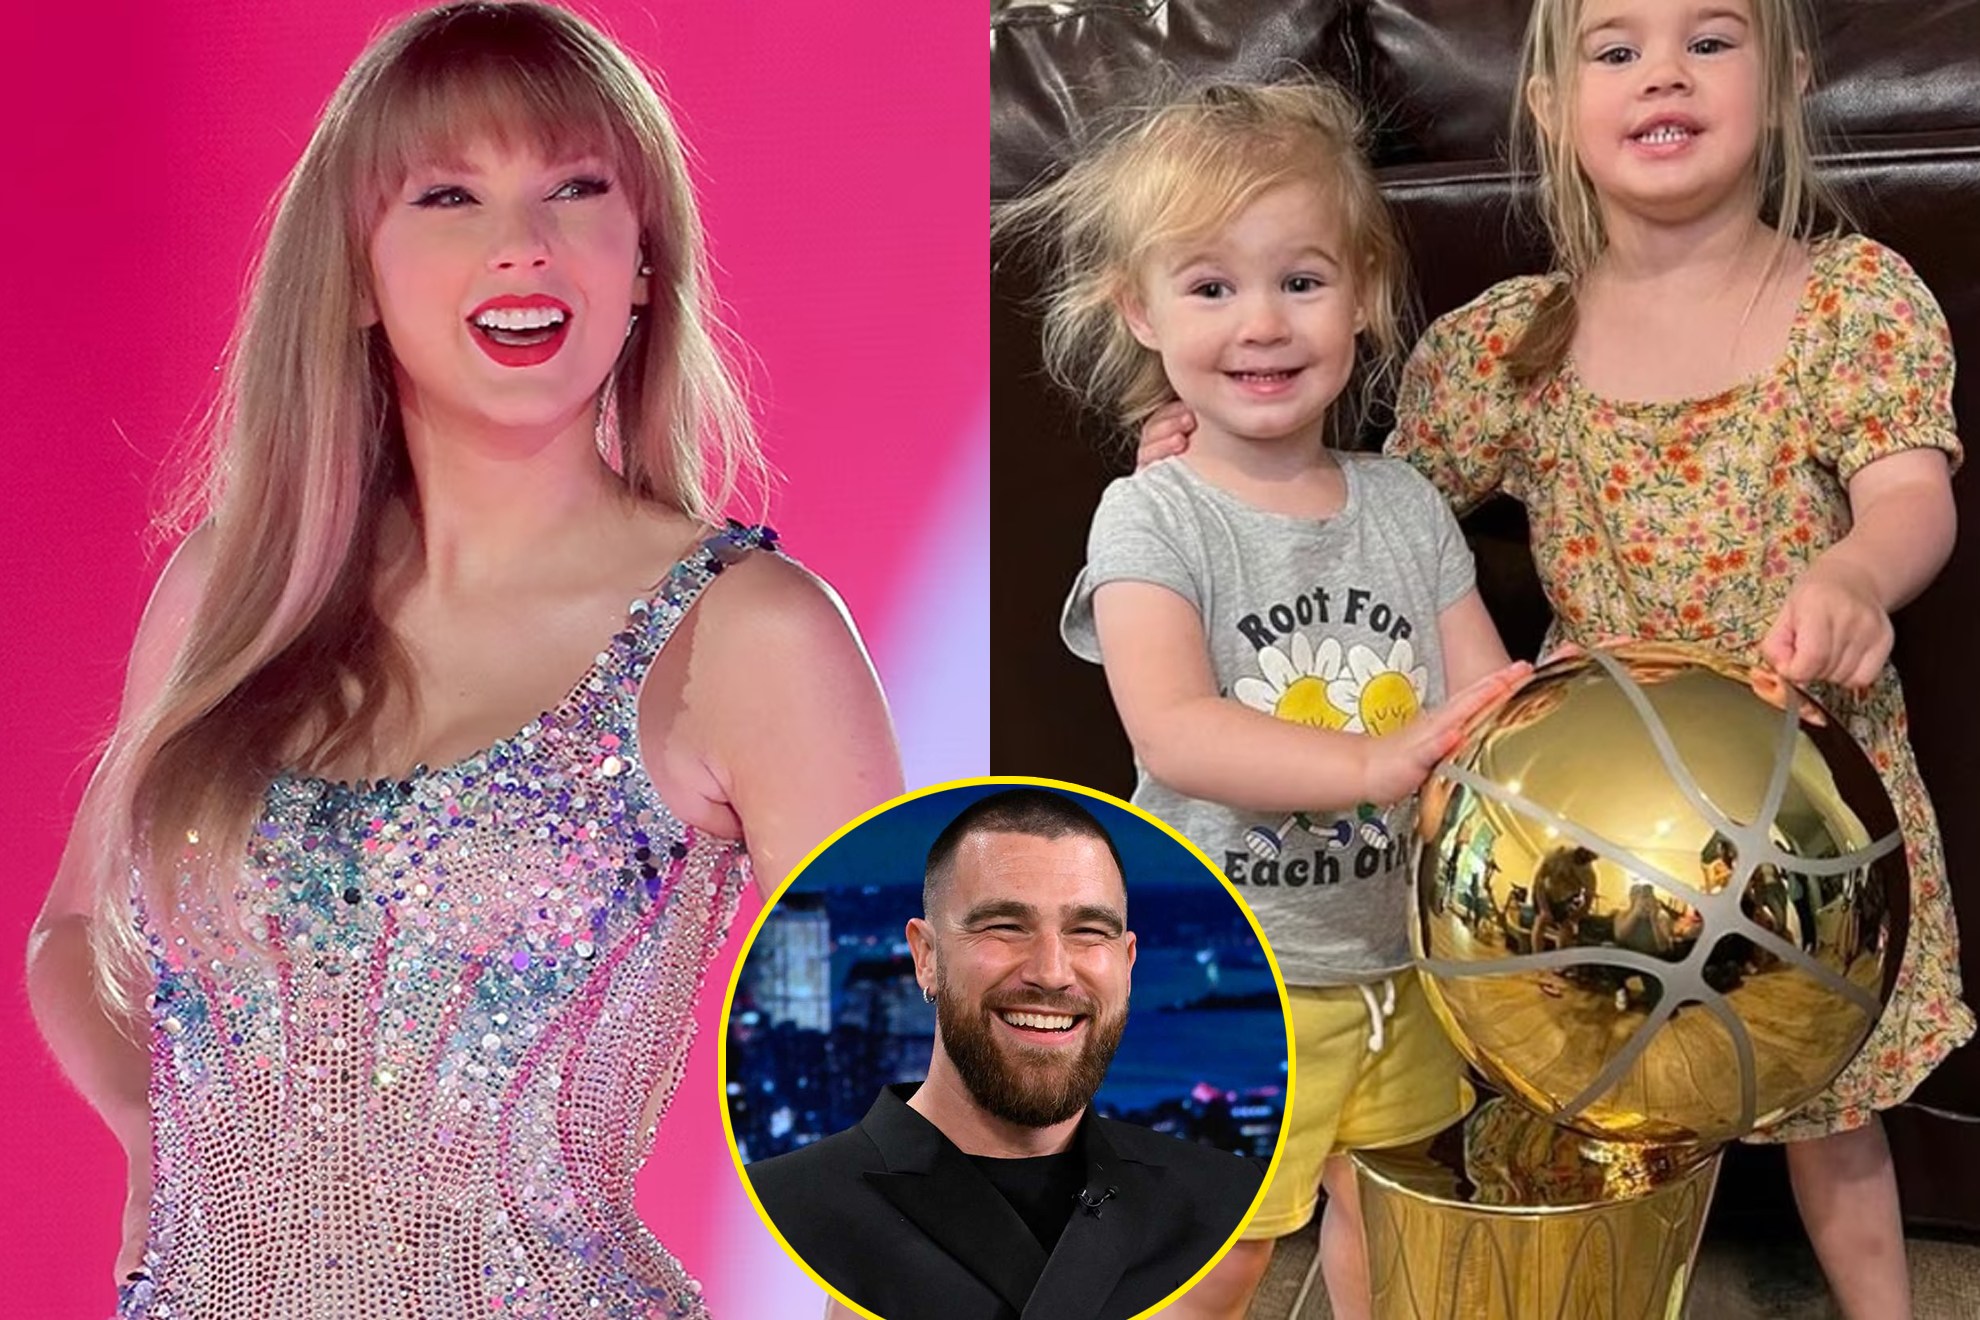 Kylie Kelce's Two Daughters, Self-Proclaimed "Crazy Fans" of Taylor Swift, Send Online Community into Frenzy!